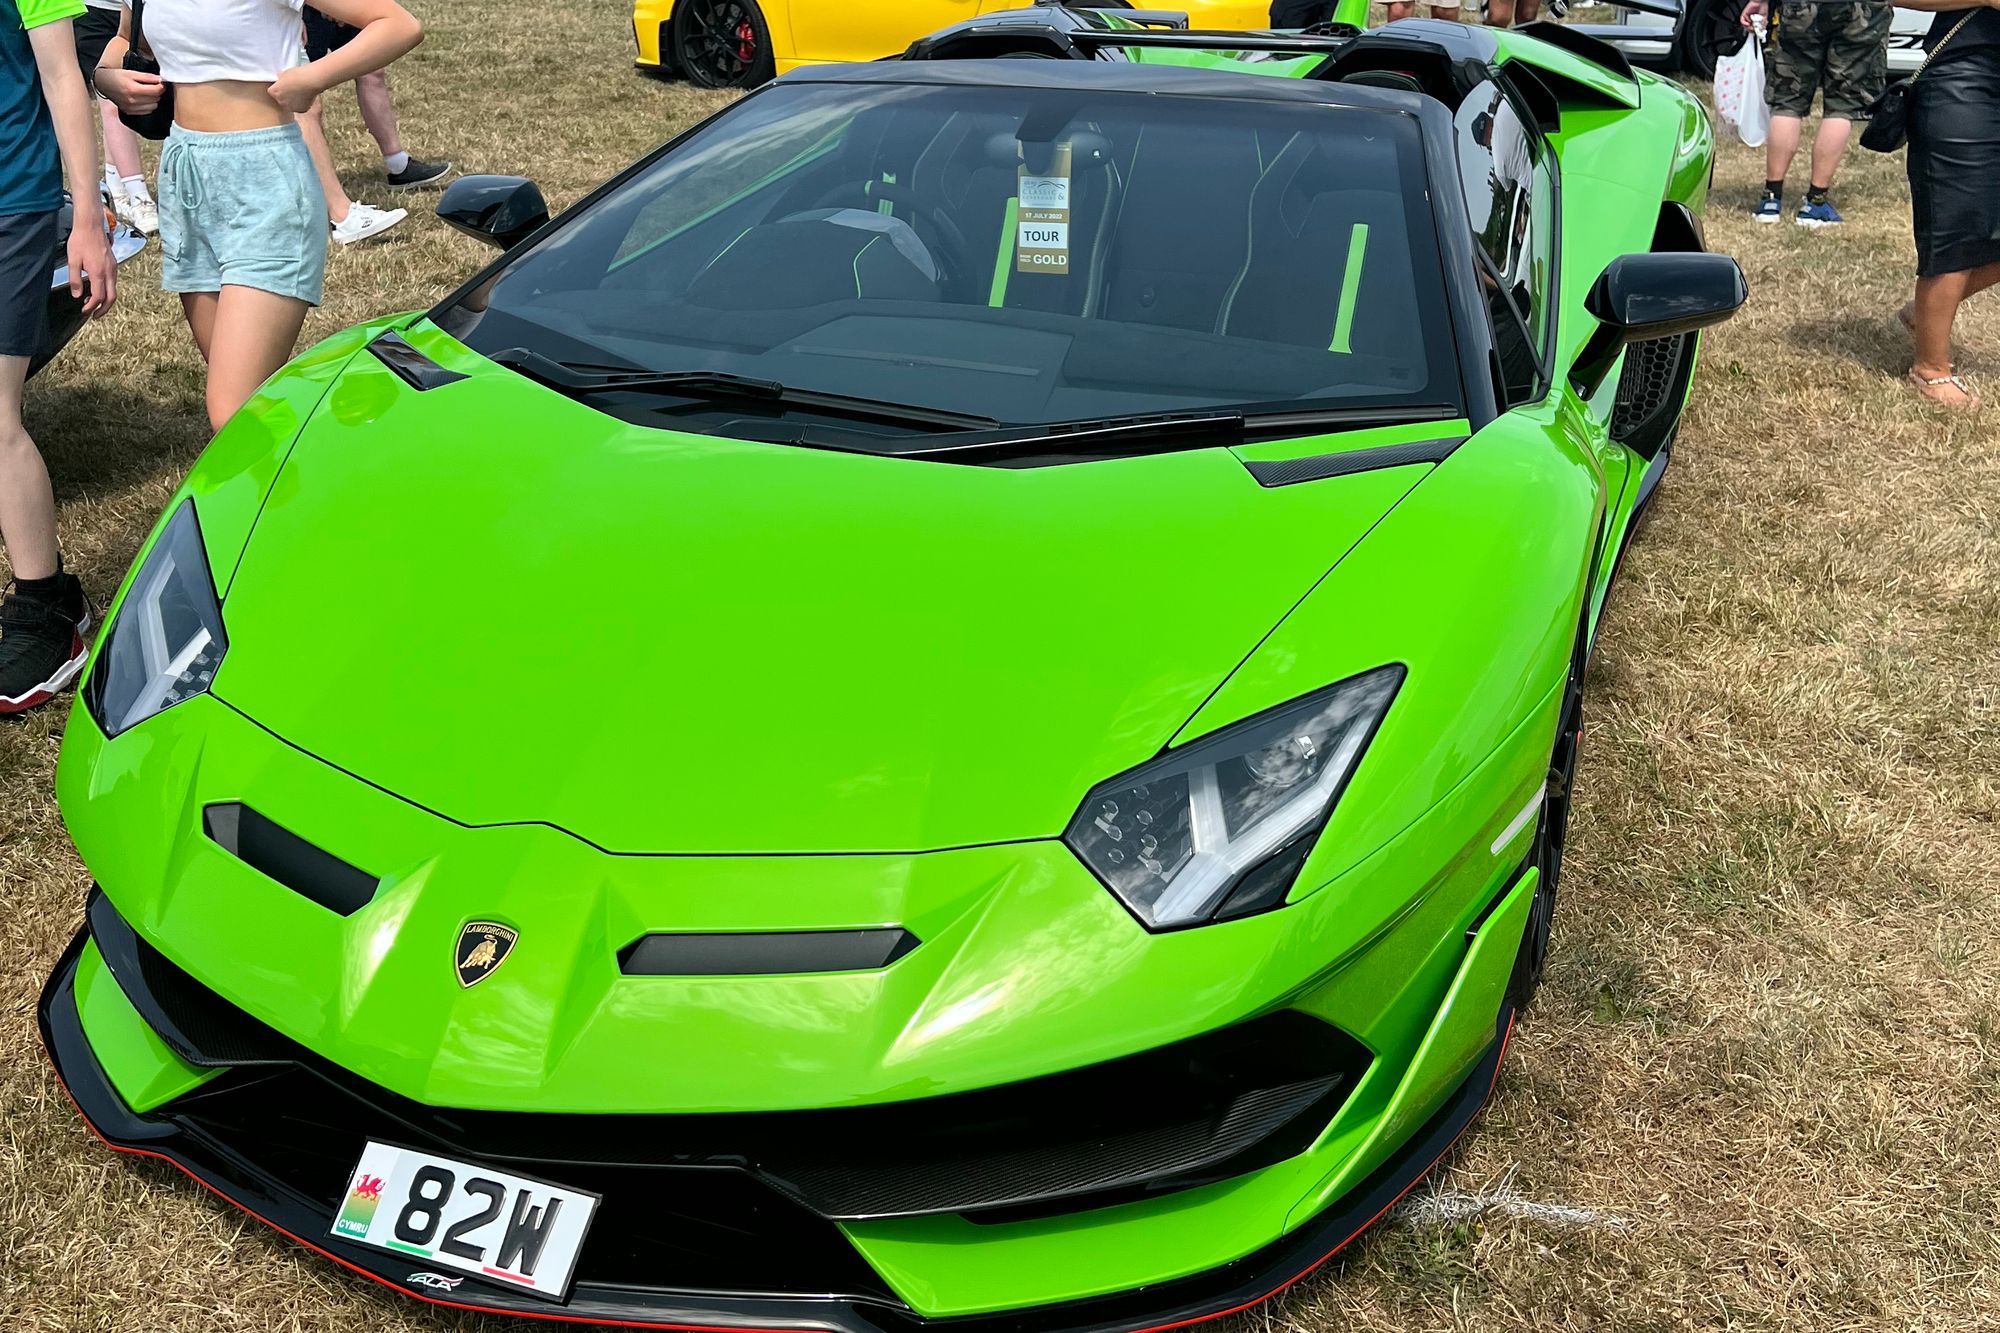 Mirabile attends Classic and supercar show Sherborne Castle